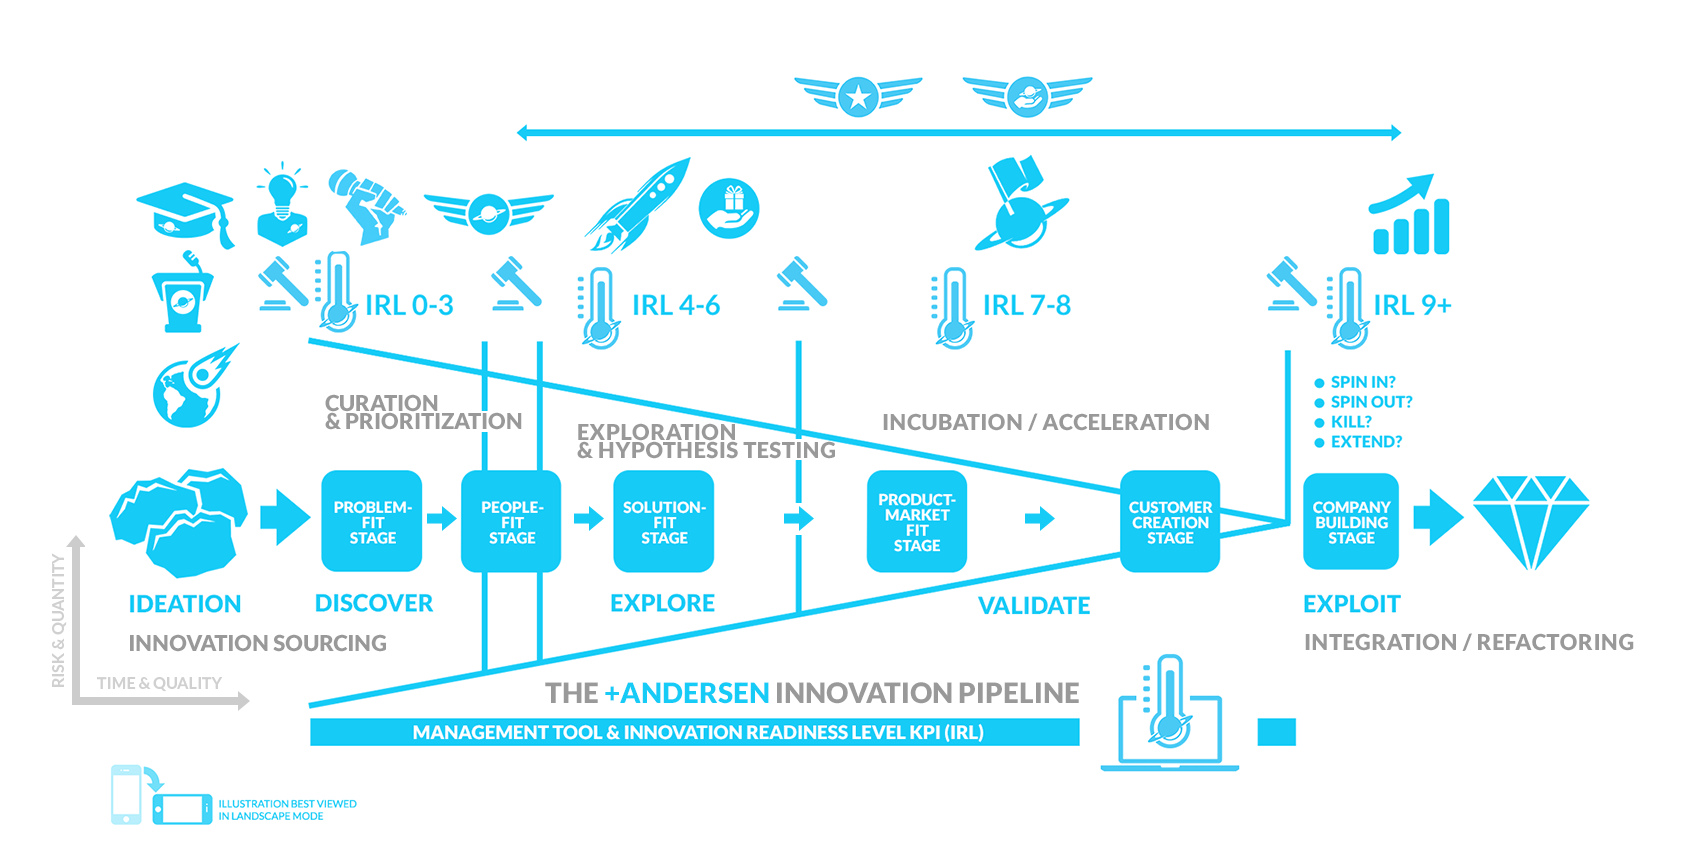 A diagram of the +Andersen Innovation Pipeline